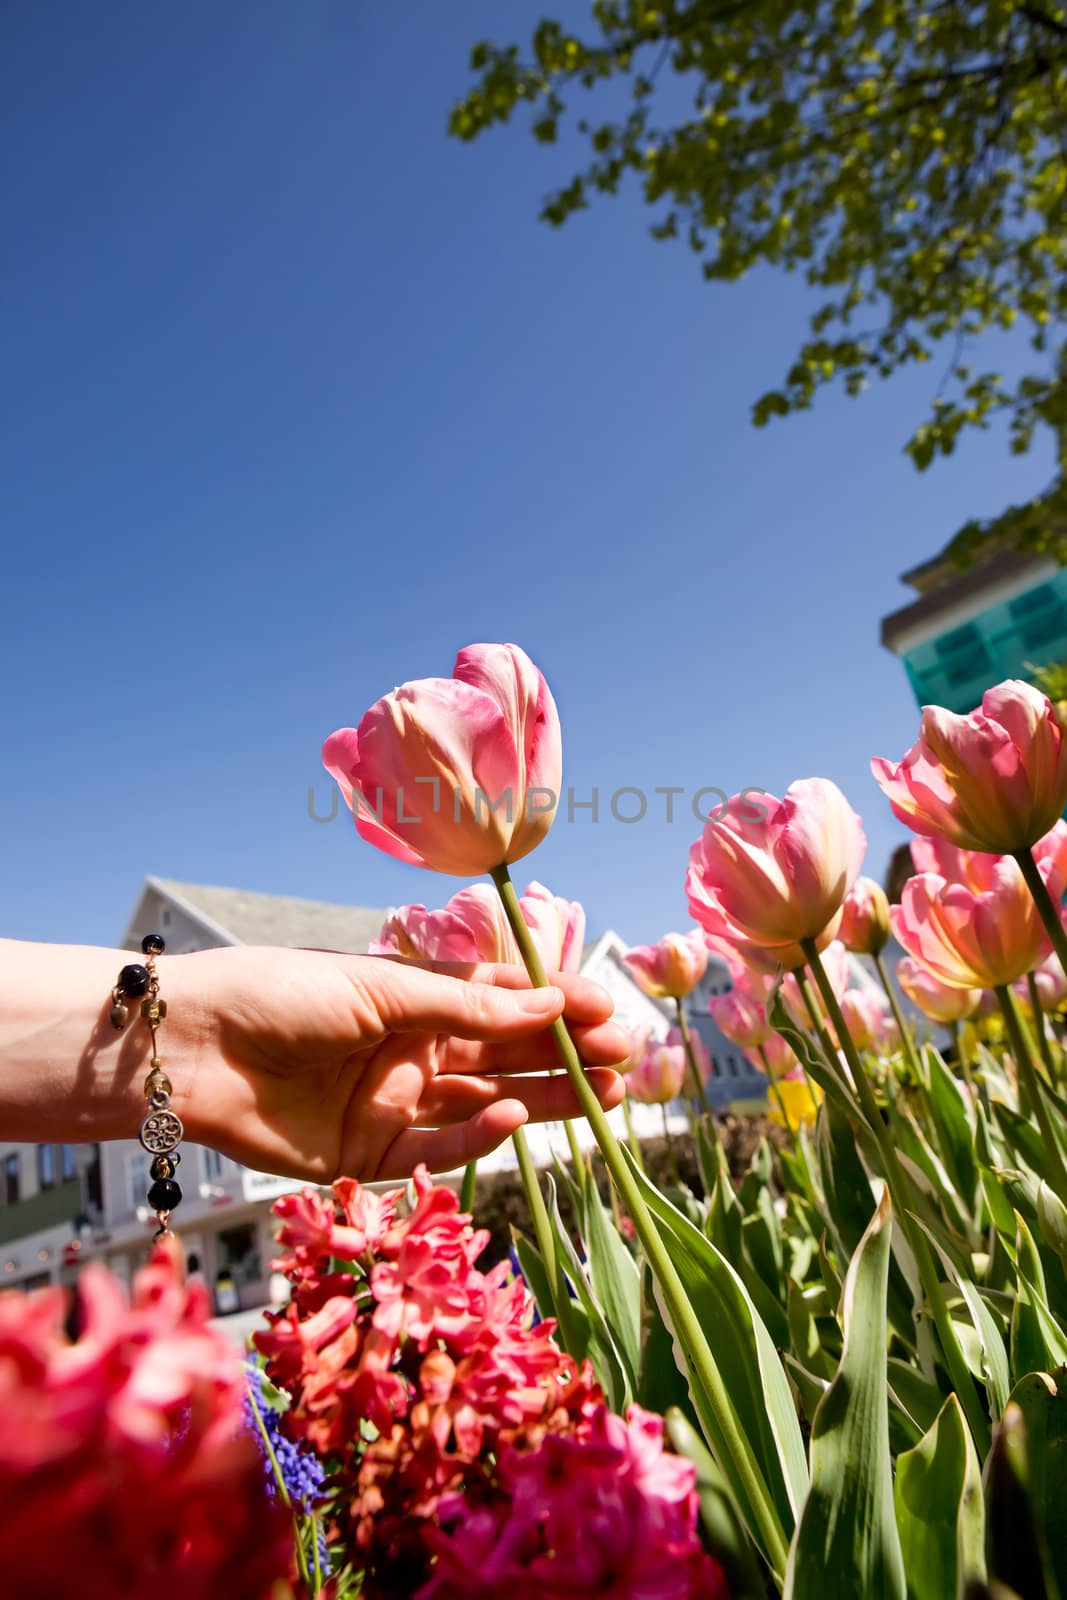 A flower garden with tulips being picked by a hand